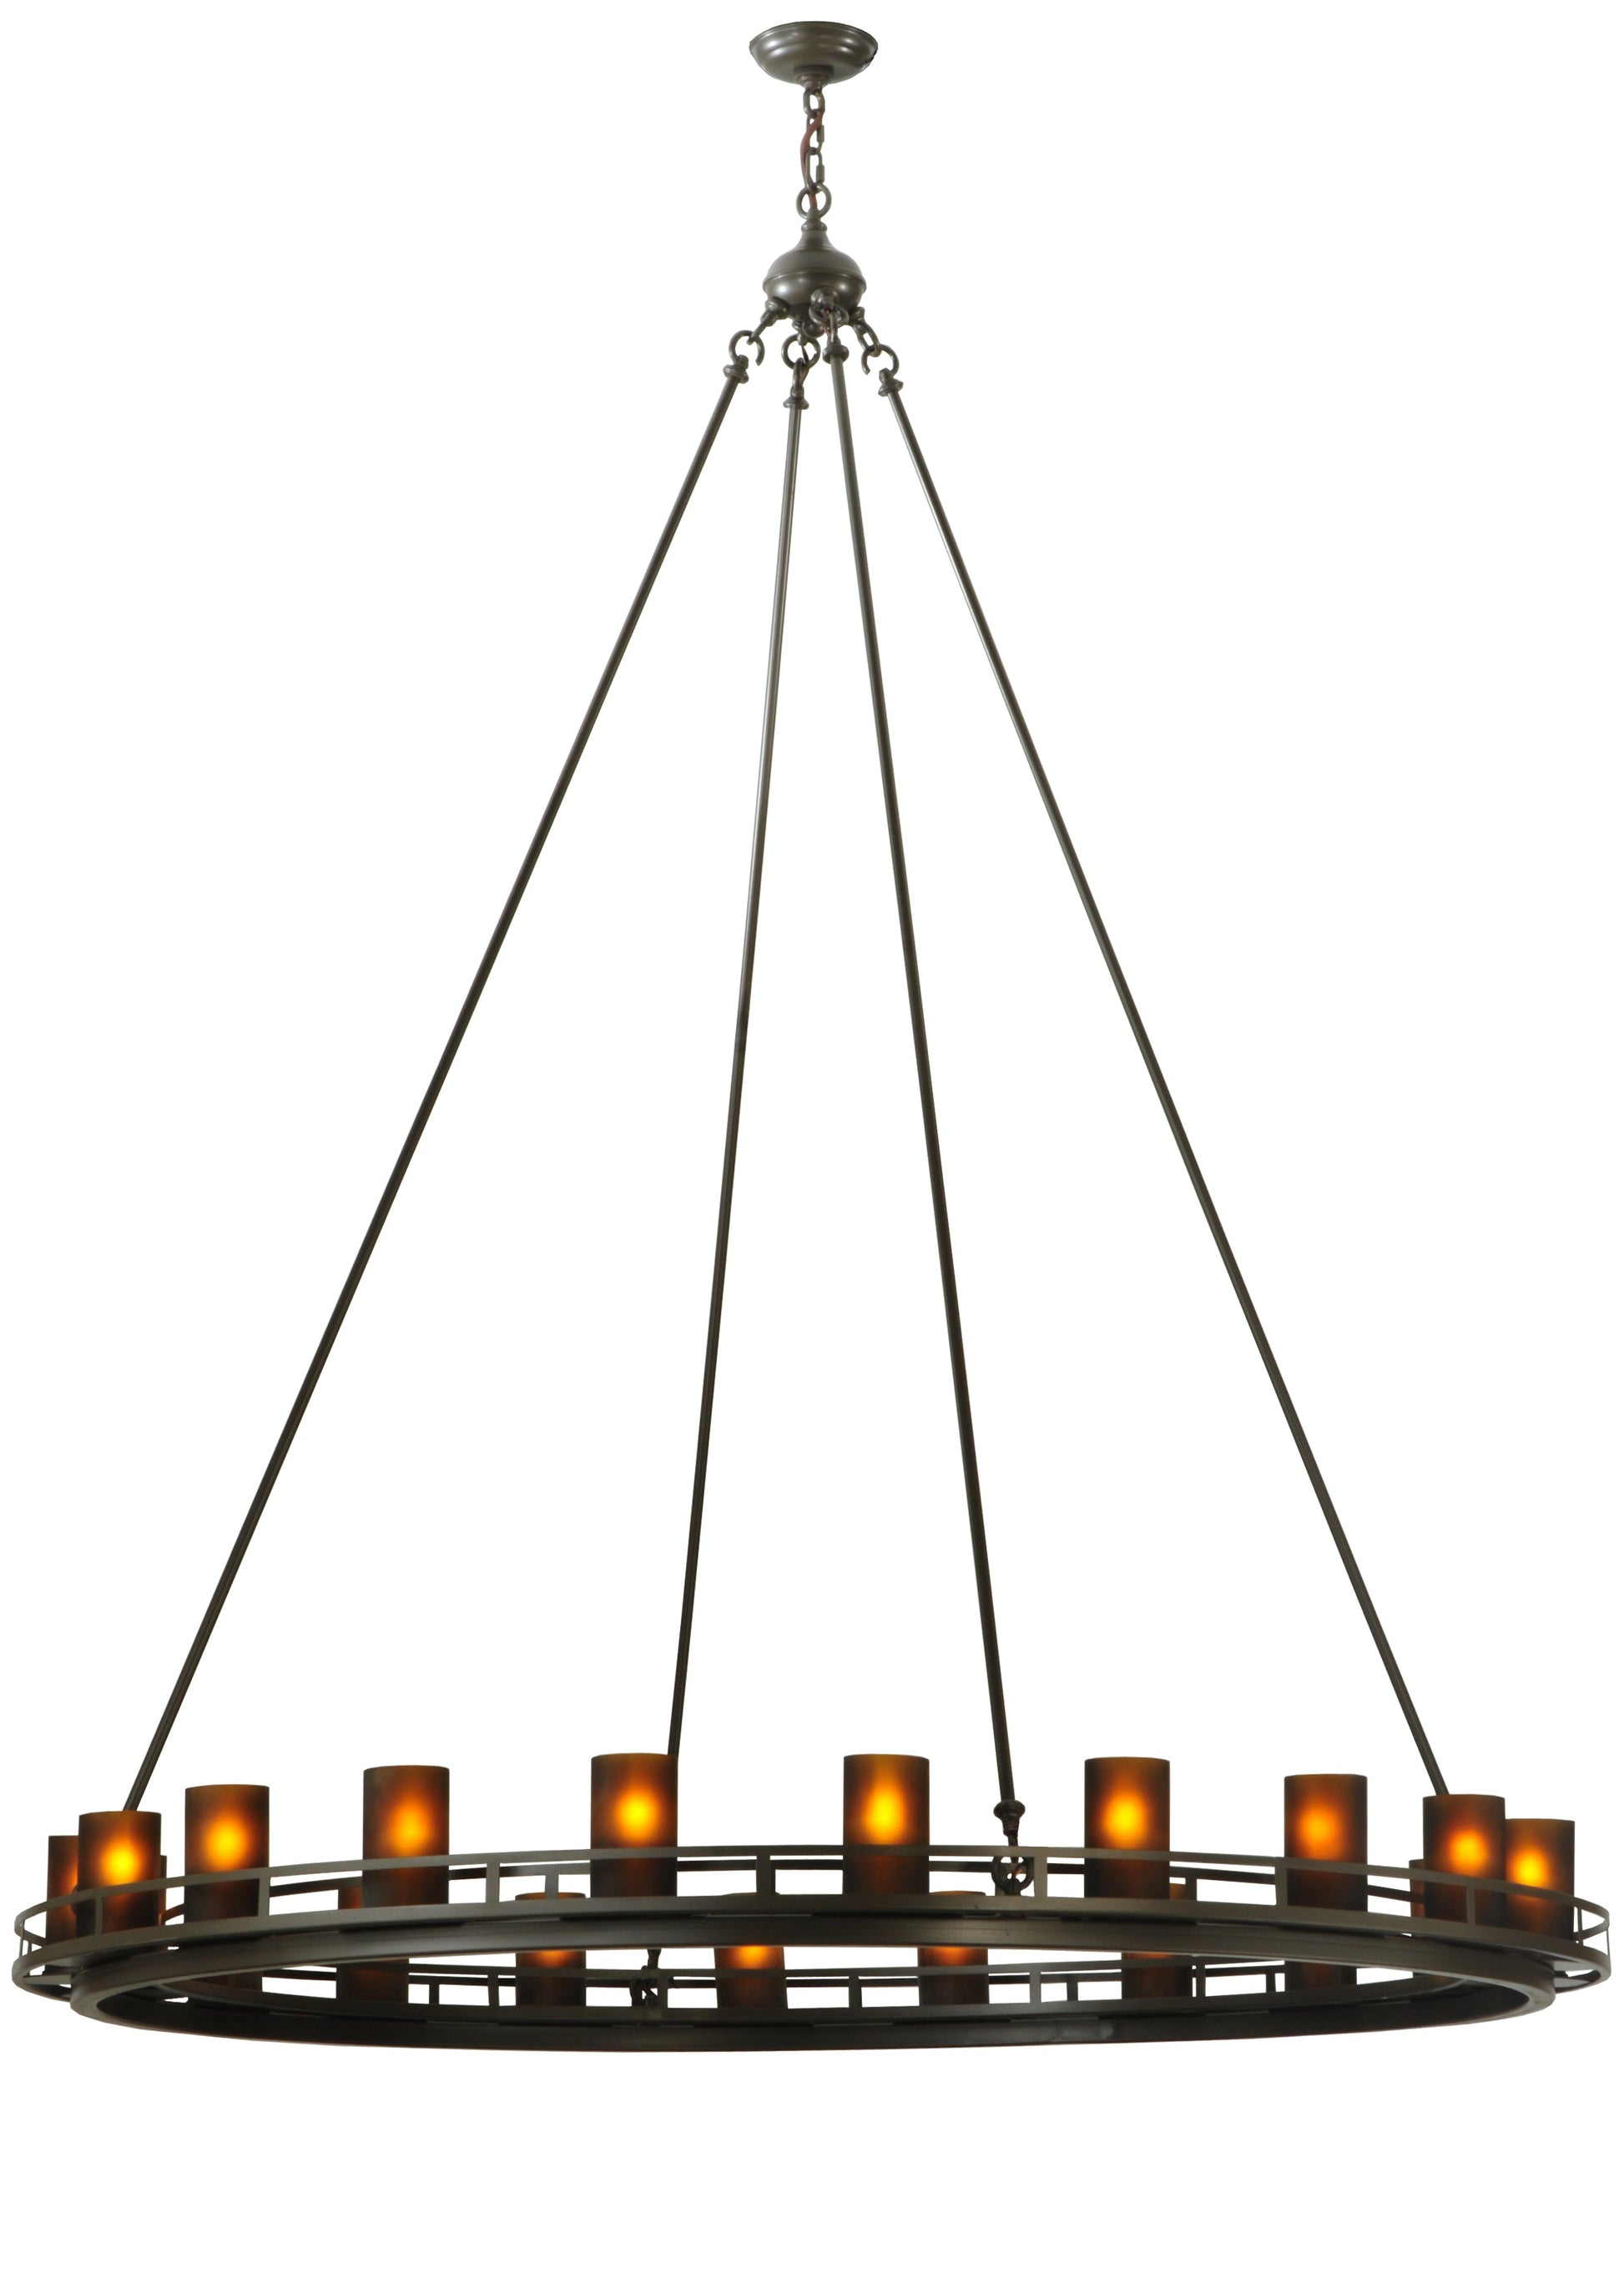 60" Barbury 20-Light Chandelier by 2nd Ave Lighting